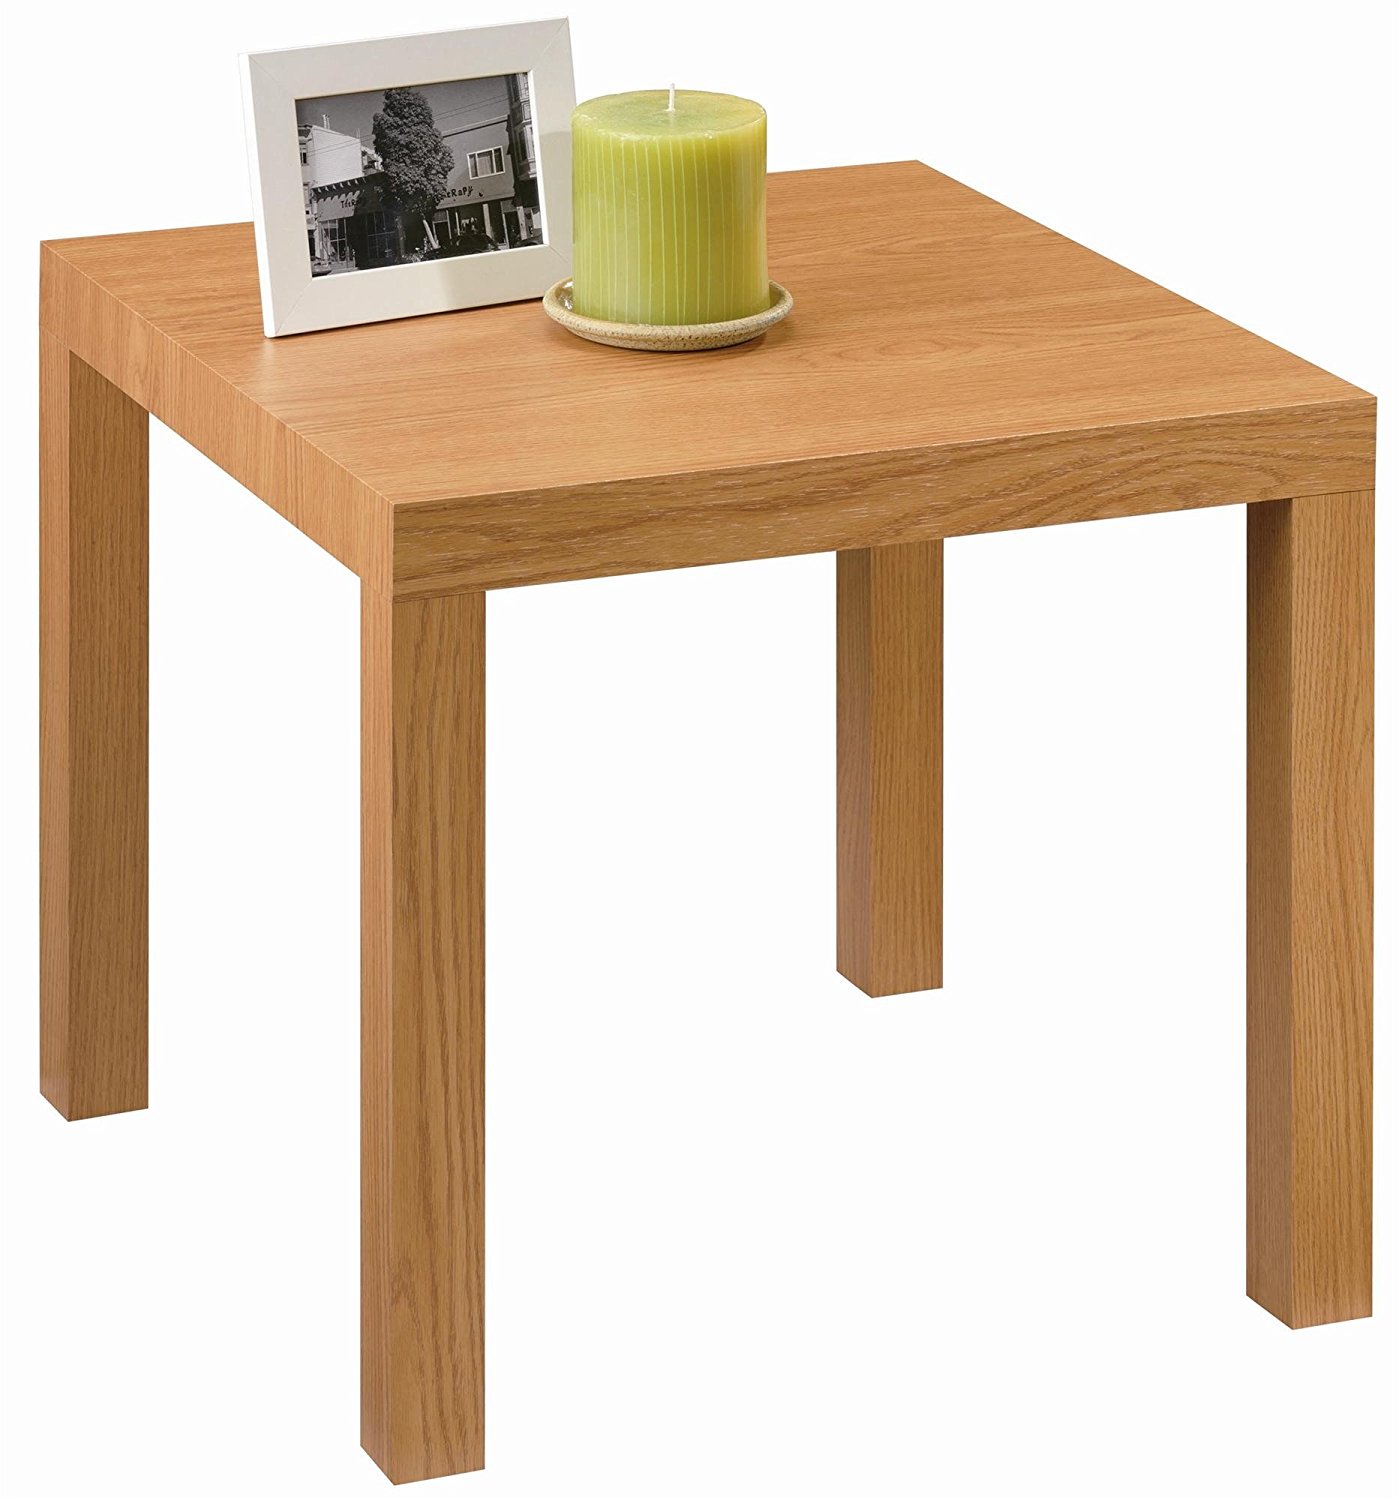 Top 10 Best Living Room Side Tables: Which Is Right For You? | Heavy.com